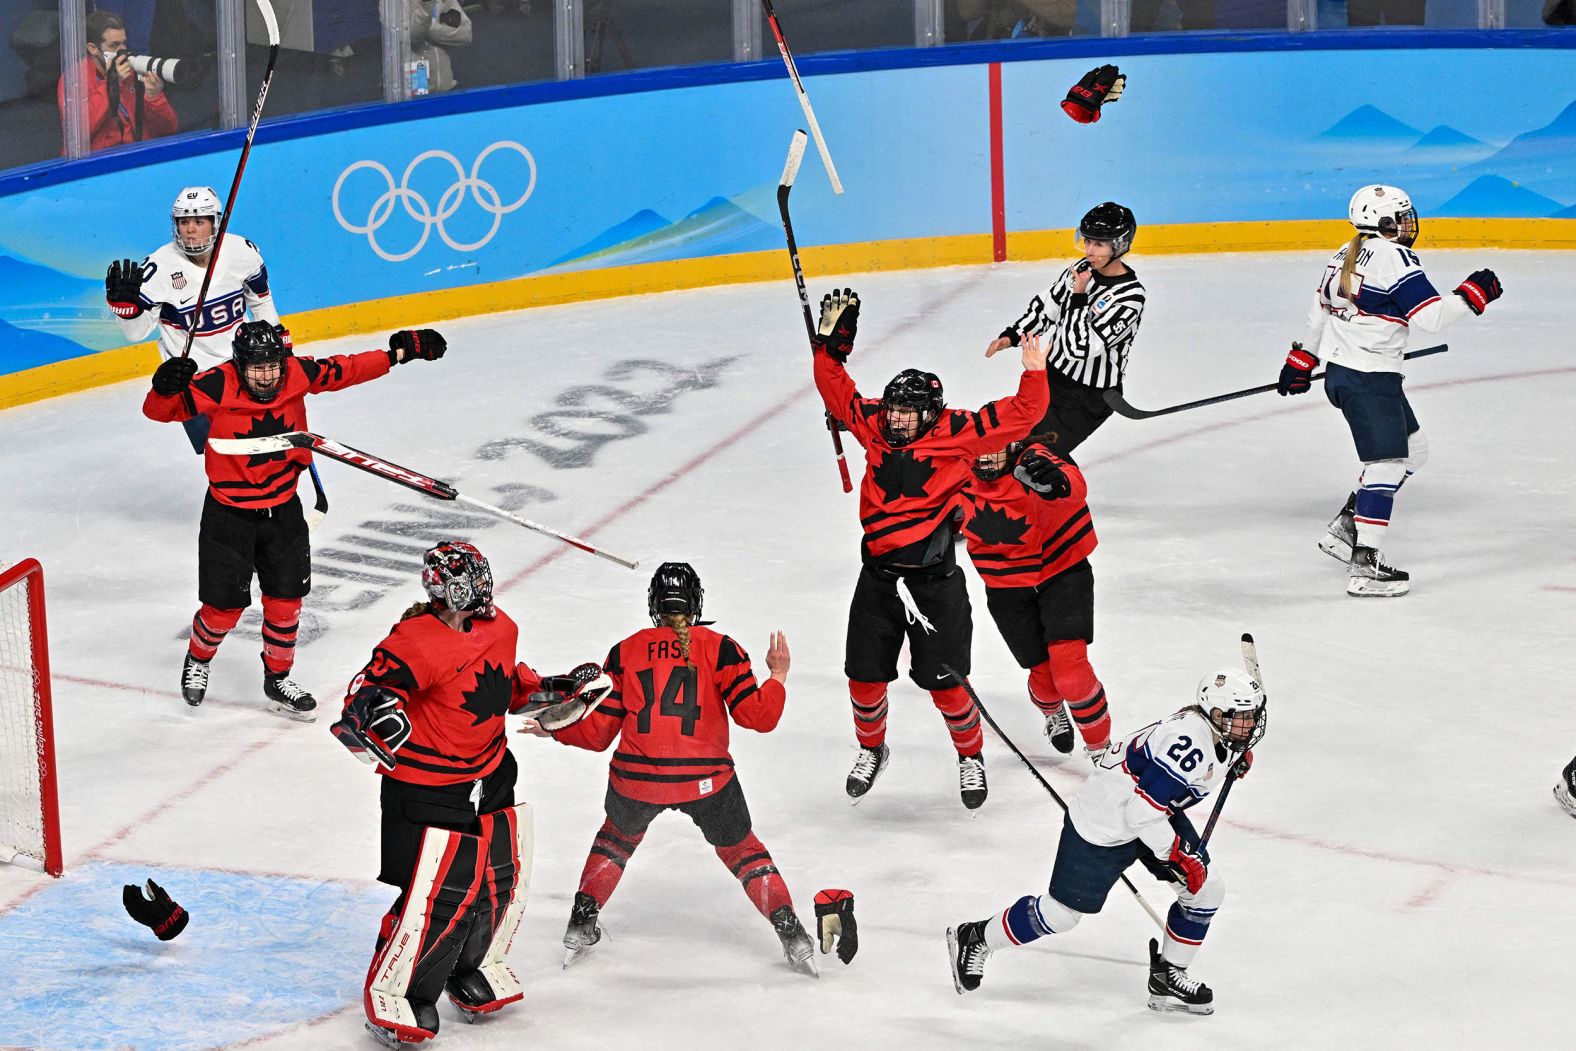 The Canadian women's hockey team celebrates after <a href="index.php?page=&url=https%3A%2F%2Fwww.cnn.com%2Fworld%2Flive-news%2Fbeijing-winter-olympics-02-17-22-spt%2Fh_20cf8f00a0ee7e39d10d849b126aacf0" target="_blank">defeating the United States 3-2 in the gold-medal game</a> on February 17. Since women's hockey became an Olympic sport in 1998, only Canada and the United States have won gold. The two countries have played in the gold-medal game in the last four Olympics, with Canada winning three of them.